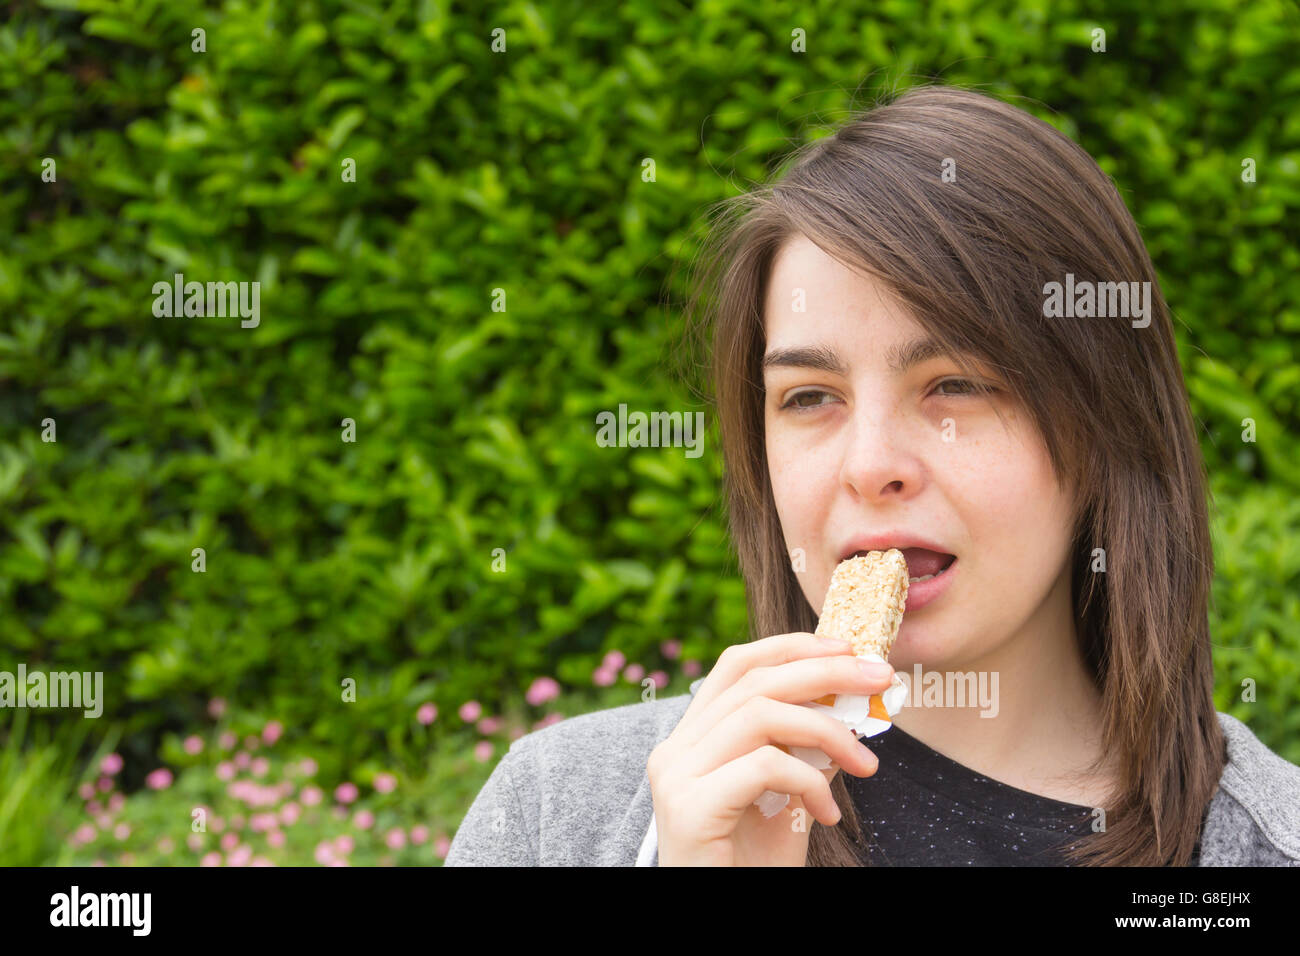 Young woman, adult or late teens, headshot in a park eating a cereal bar. Stock Photo